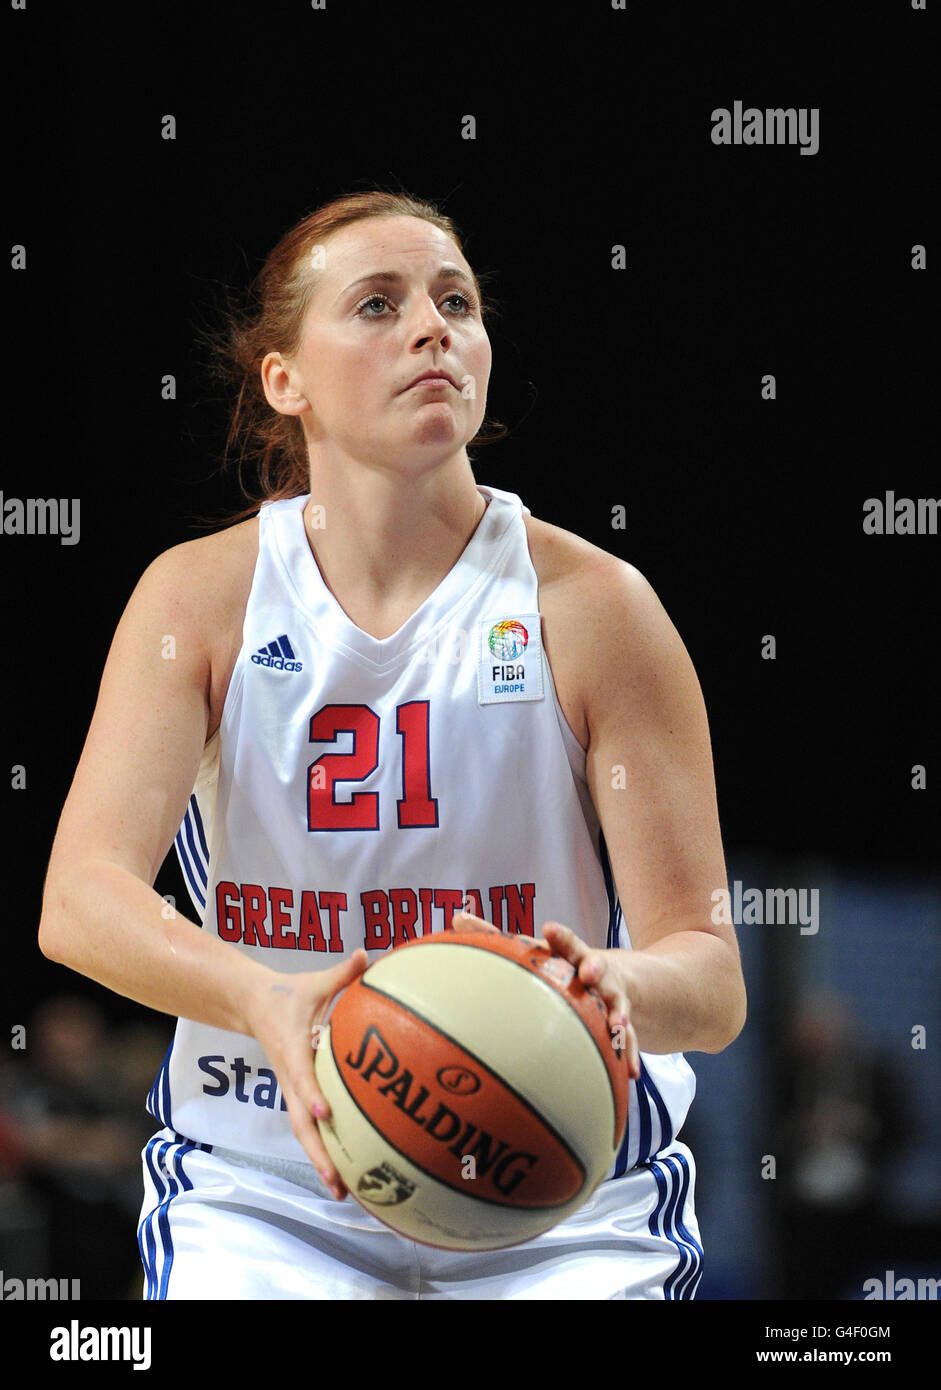 Basketball - WNBA Live - Great Britain v Atlanta Dream - MEN Arena. Great Britain's Rose Anderson during to the WNBA Live match at the MEN Arena, Manchester. Stock Photo